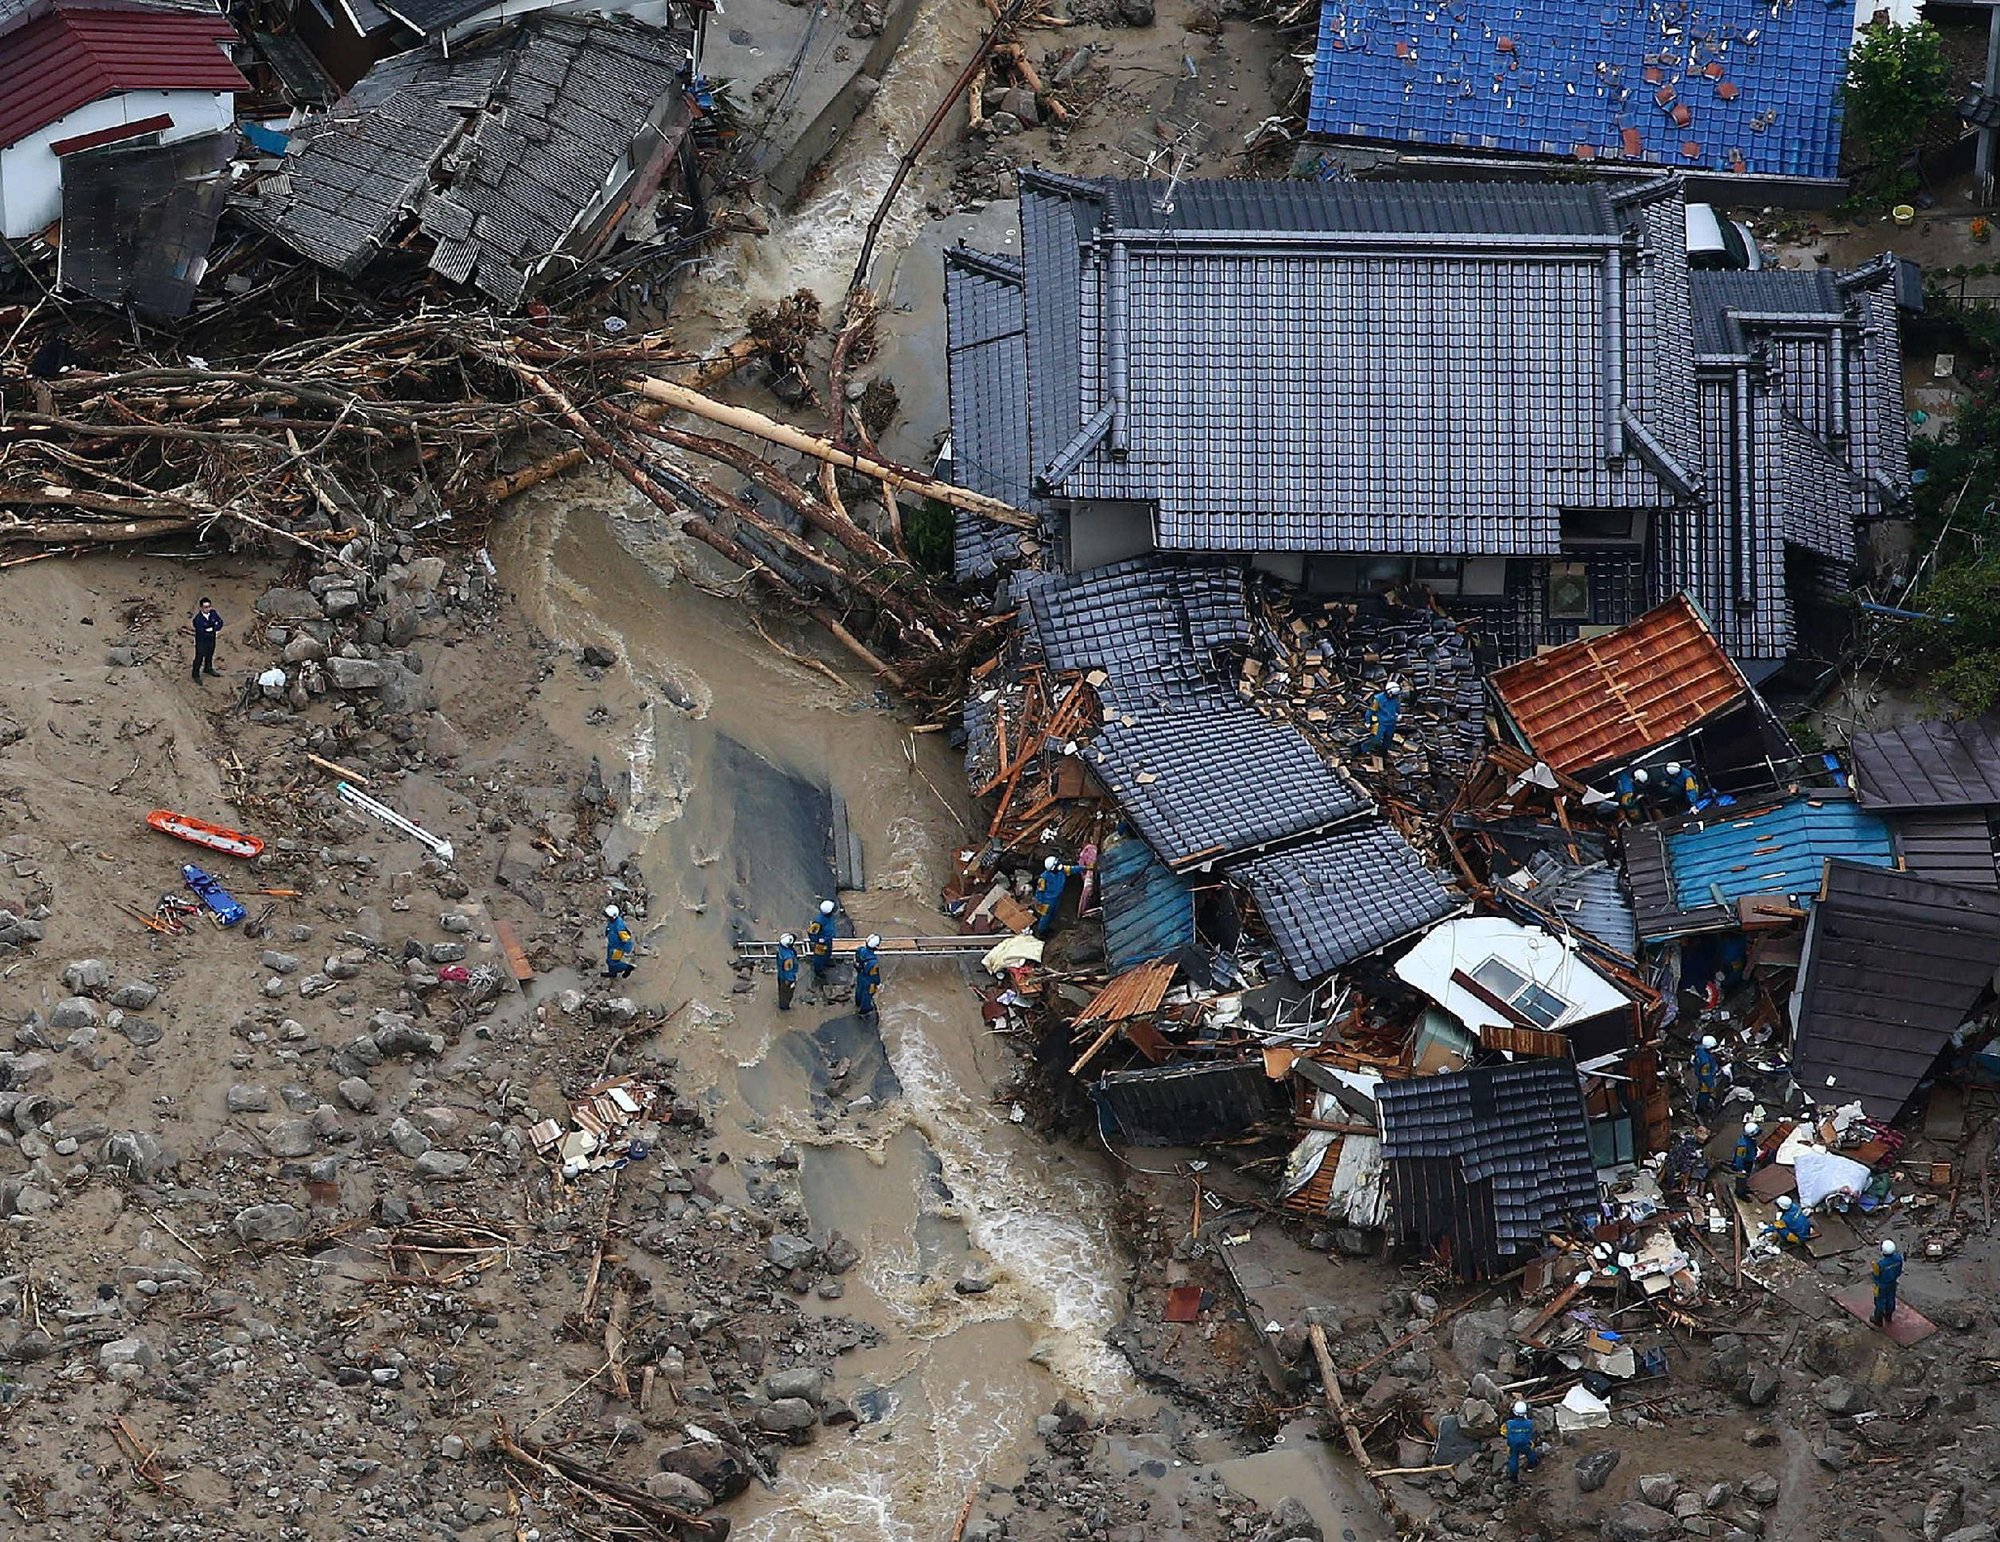 This aerial view shows rescue workers looking for survivors at the site of a landslide after heavy rains hit the city of Hiroshima, western Japan, on Aug. 20, 2014.